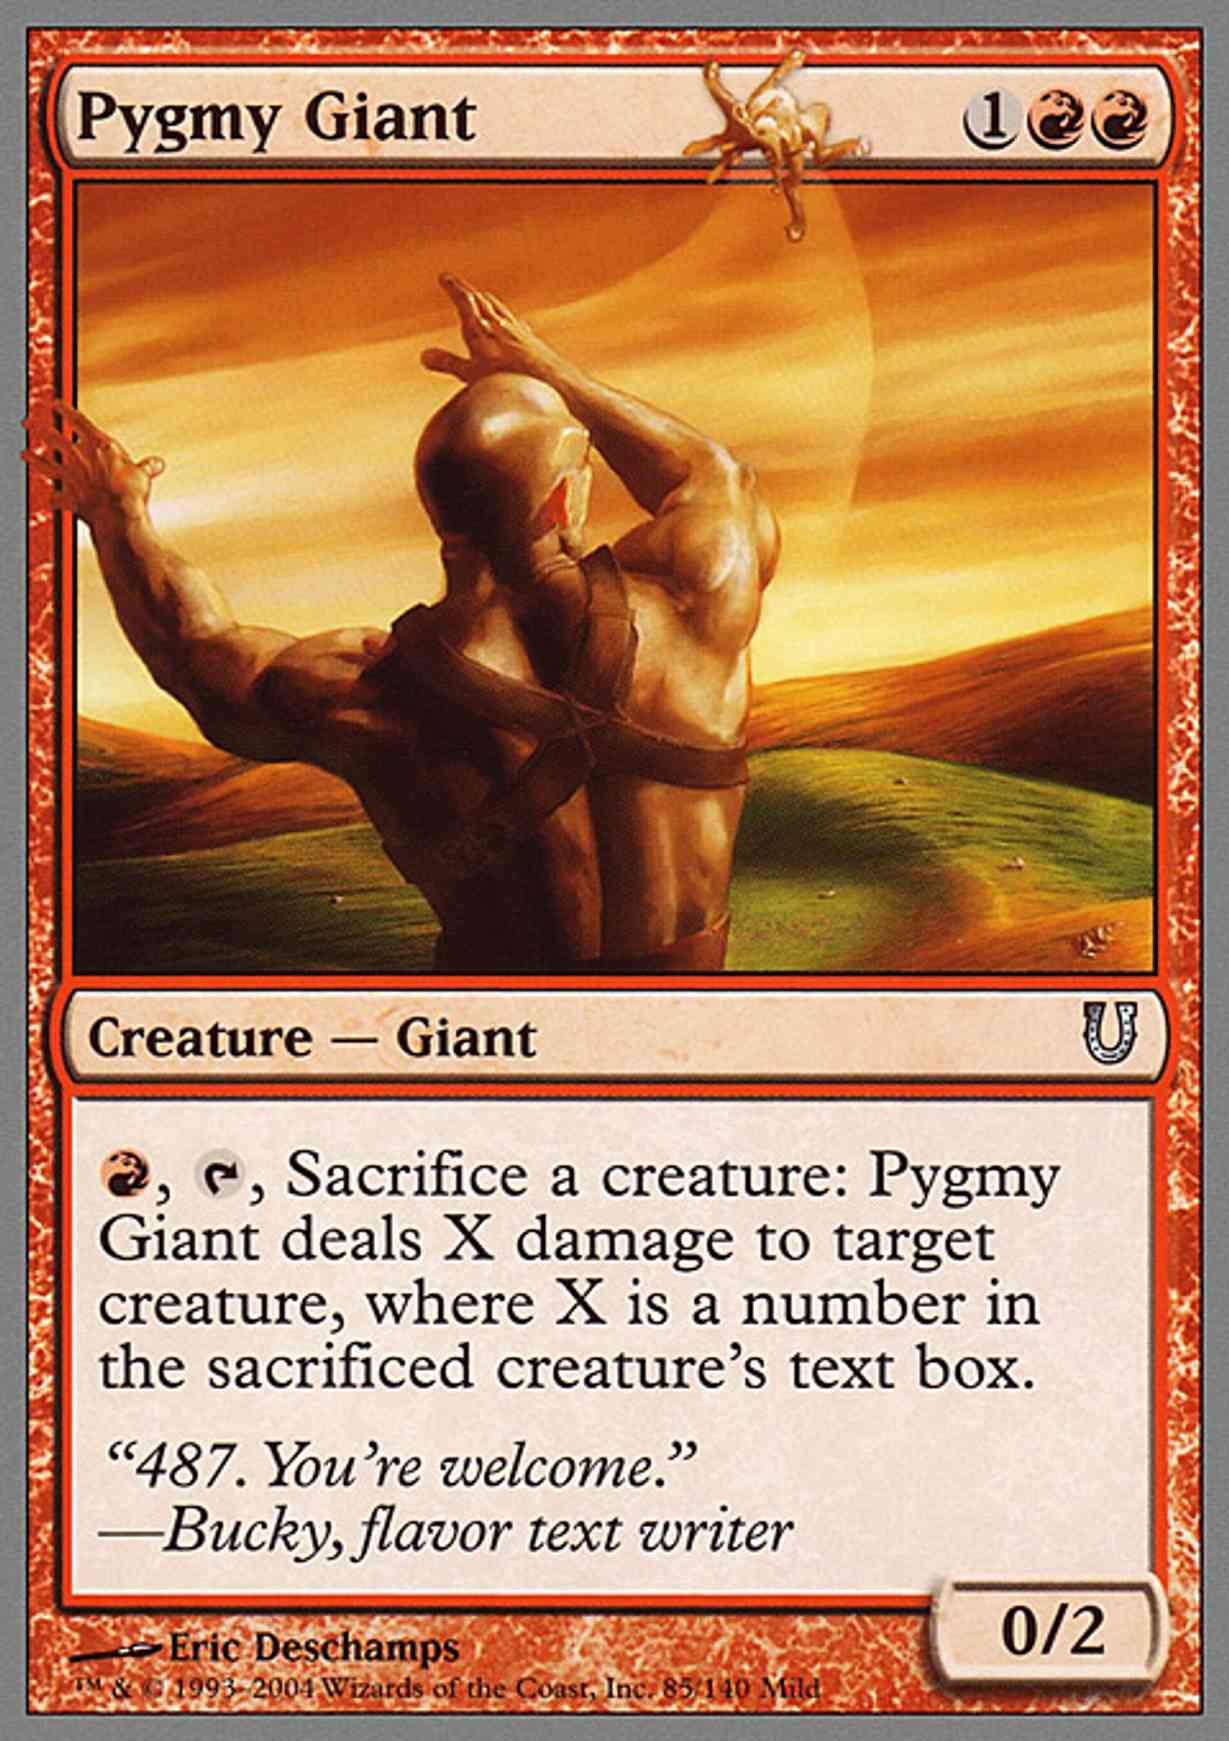 Pygmy Giant magic card front